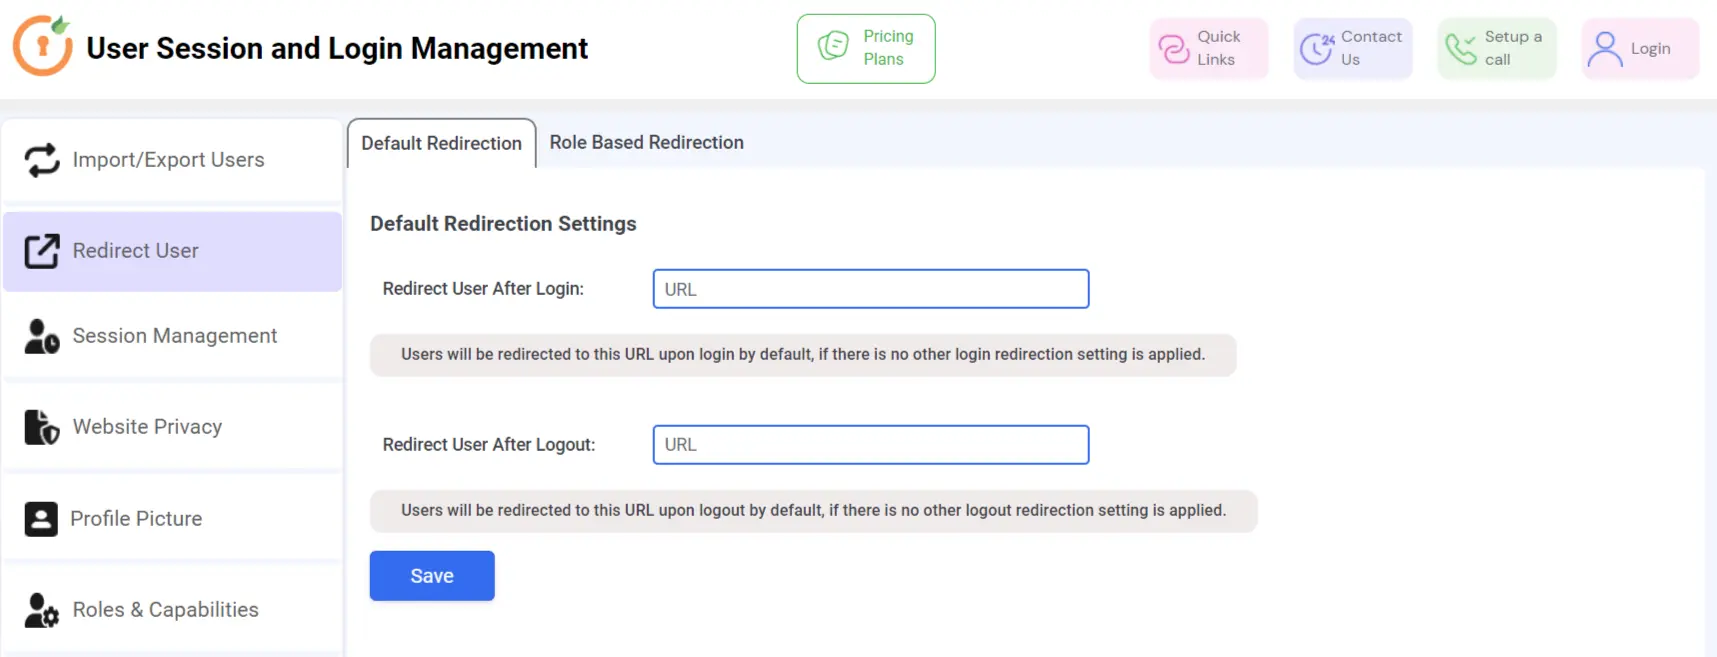 User session and login management redirect users default redirection